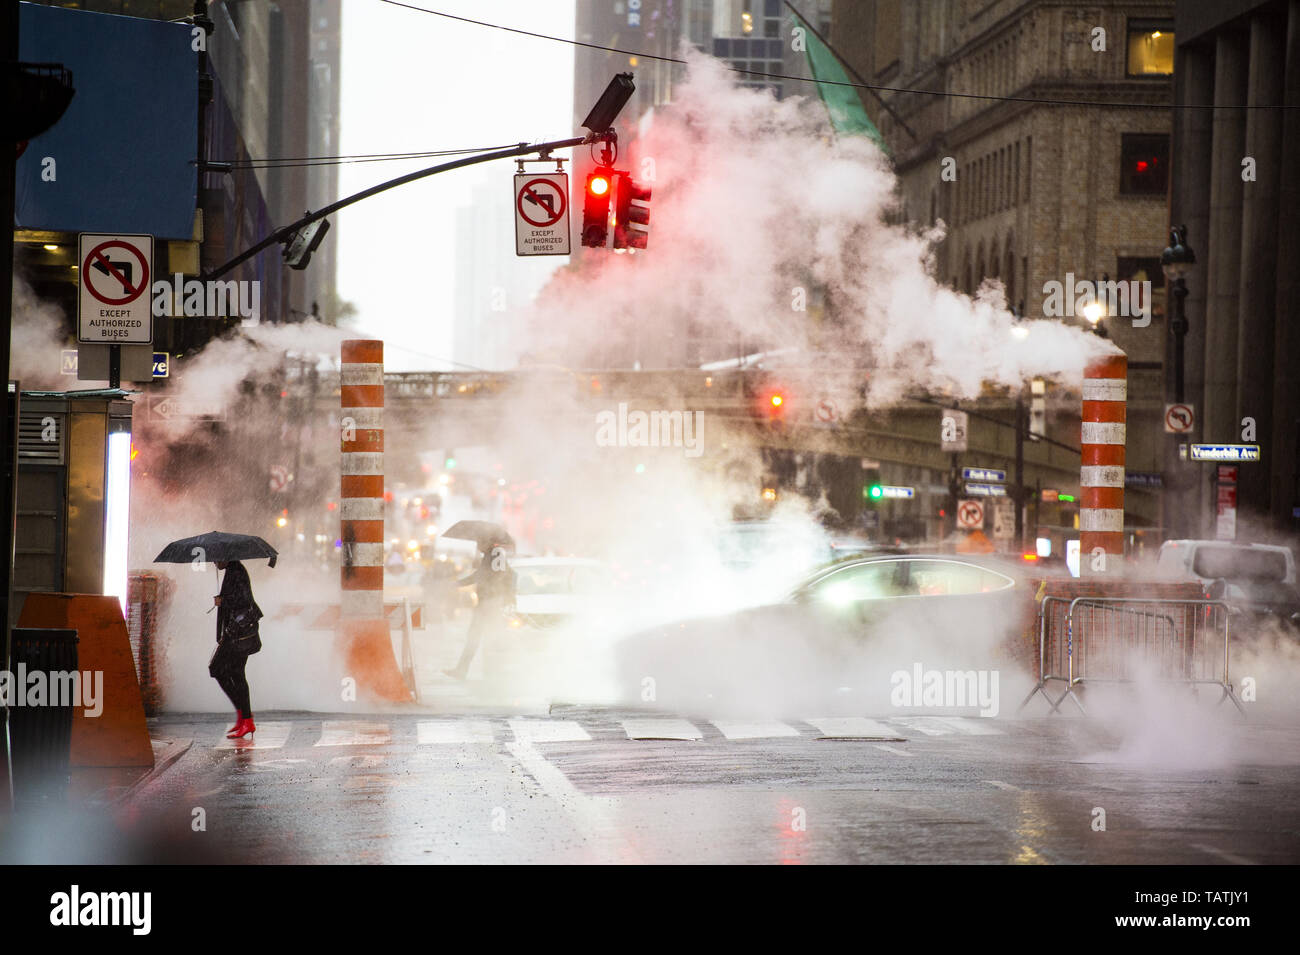 A woman with an umbrella and red high heels shoes is crossing the 42nd street in Manhattan. Cars and steam coming out from from the manholes. Stock Photo